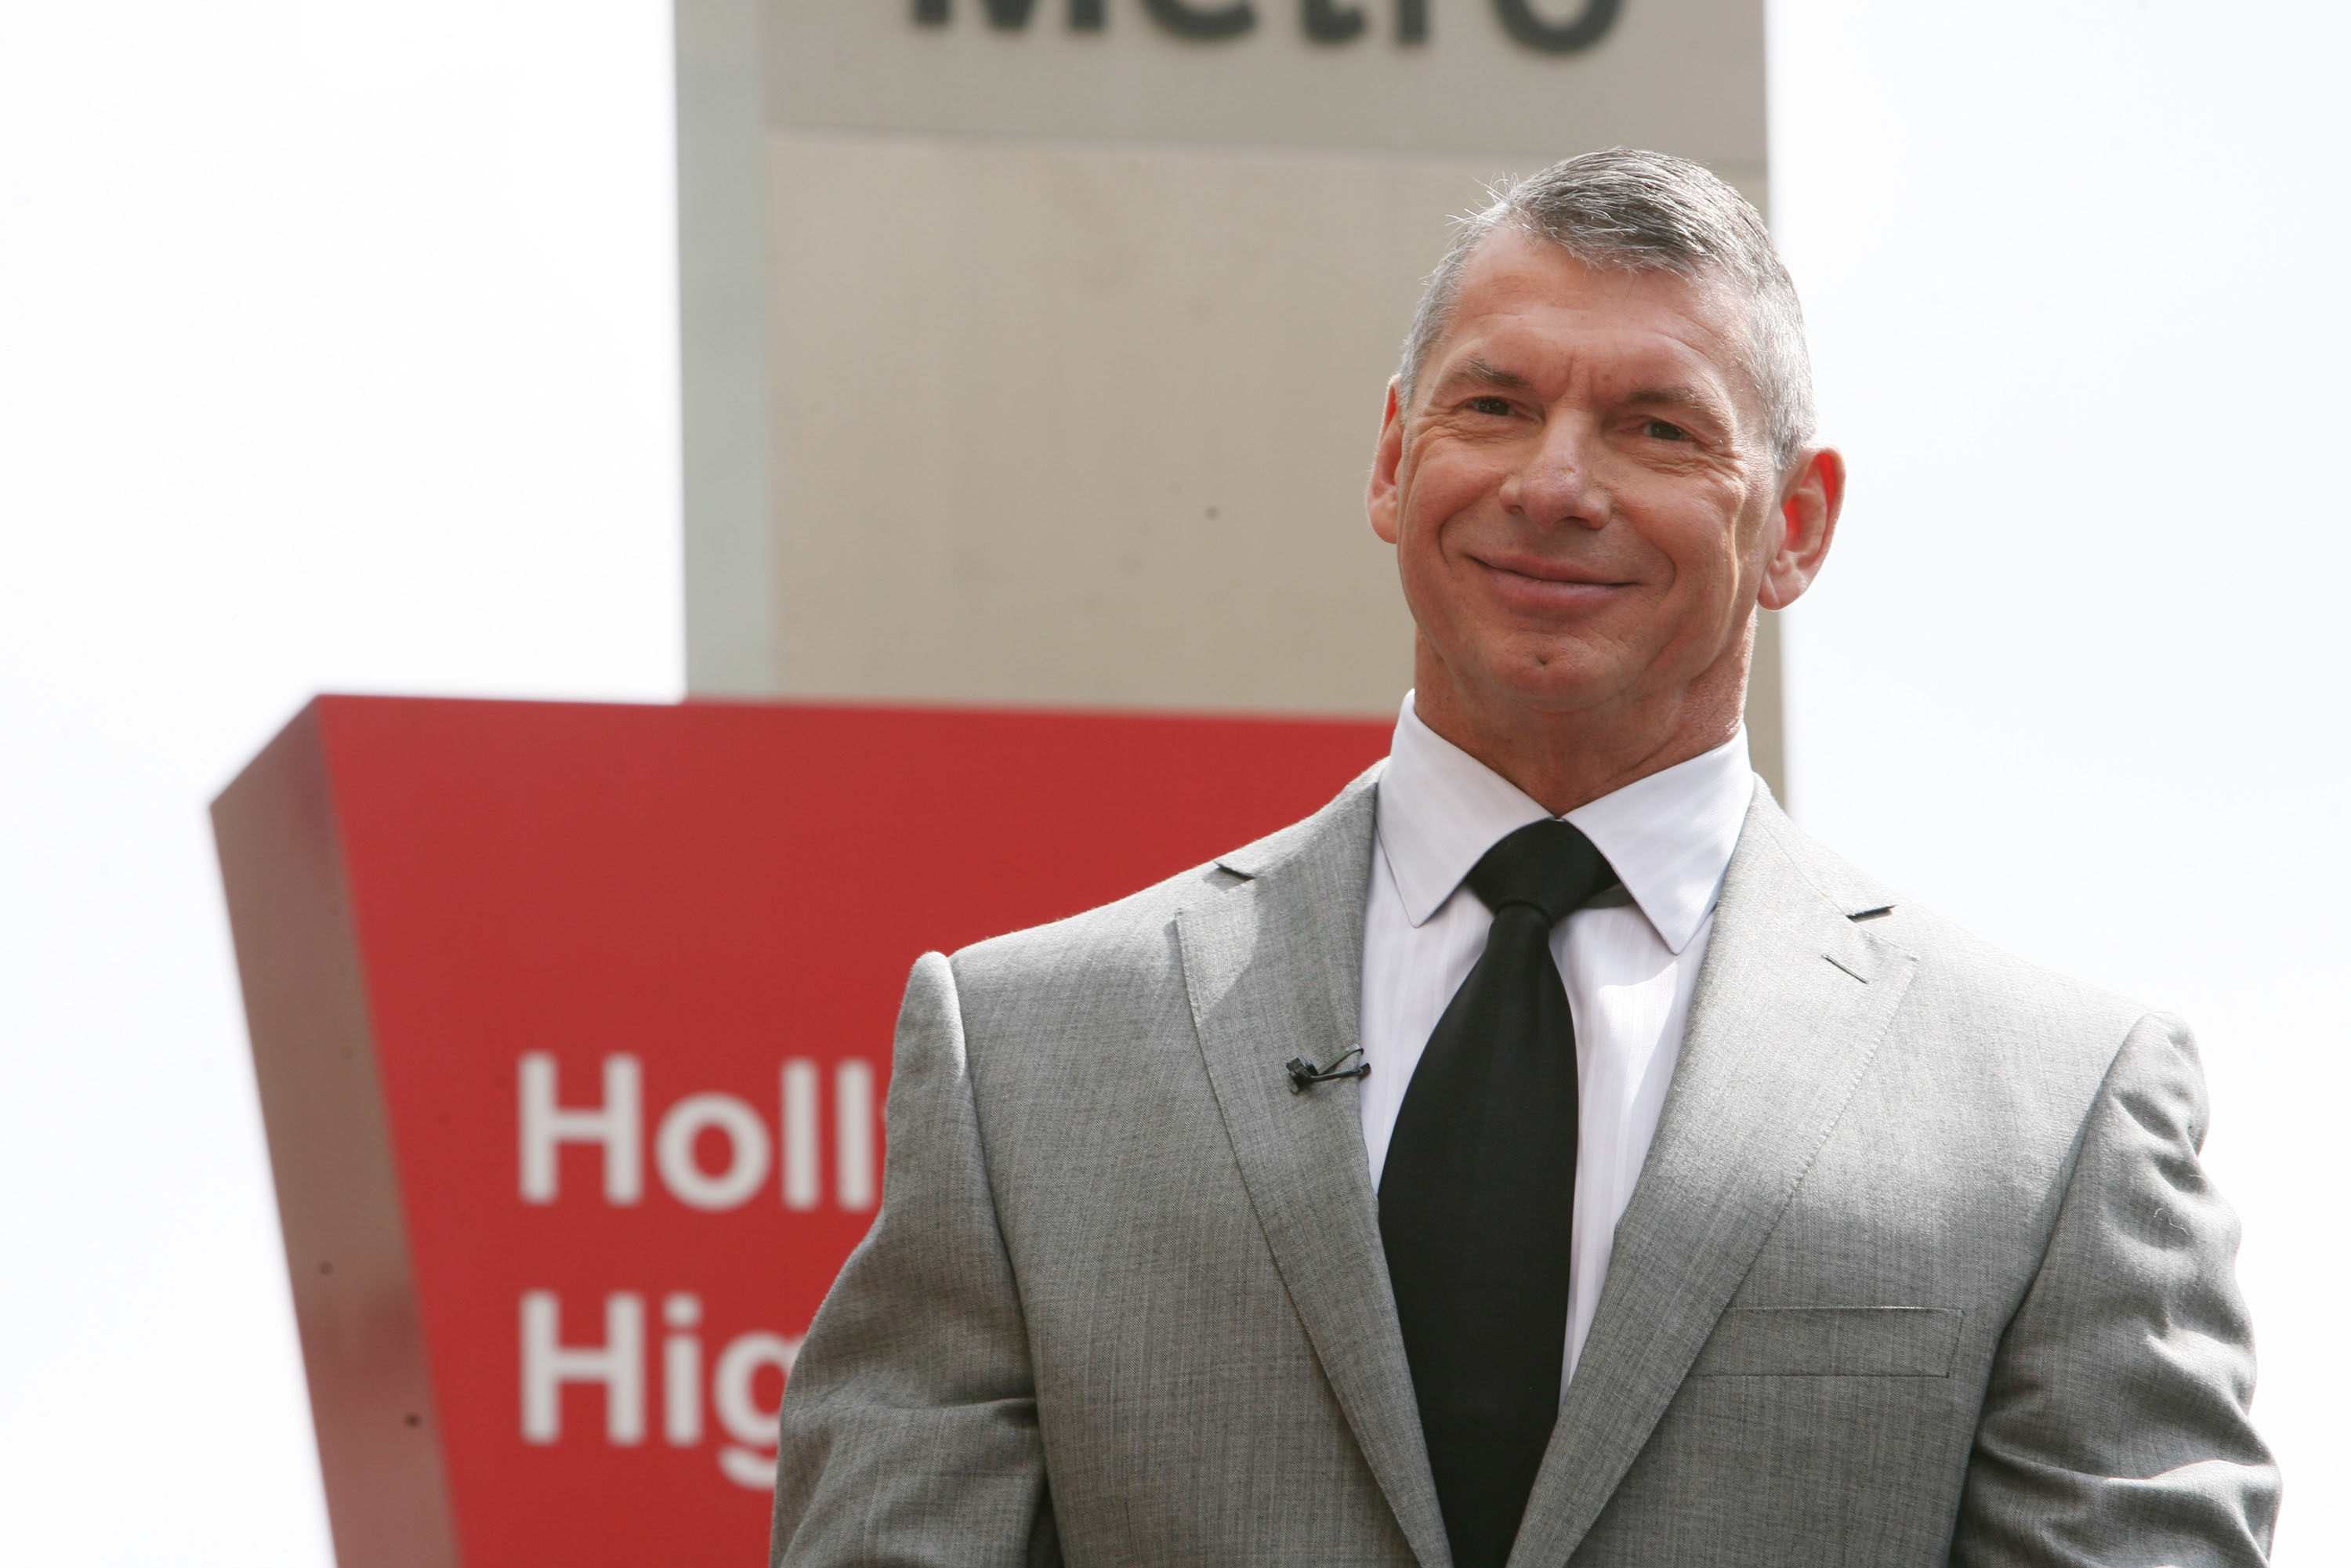 Vince McMahon was a star in the WWE world until his downfall over sexual misconduct allegations. Photo: Getty Images
